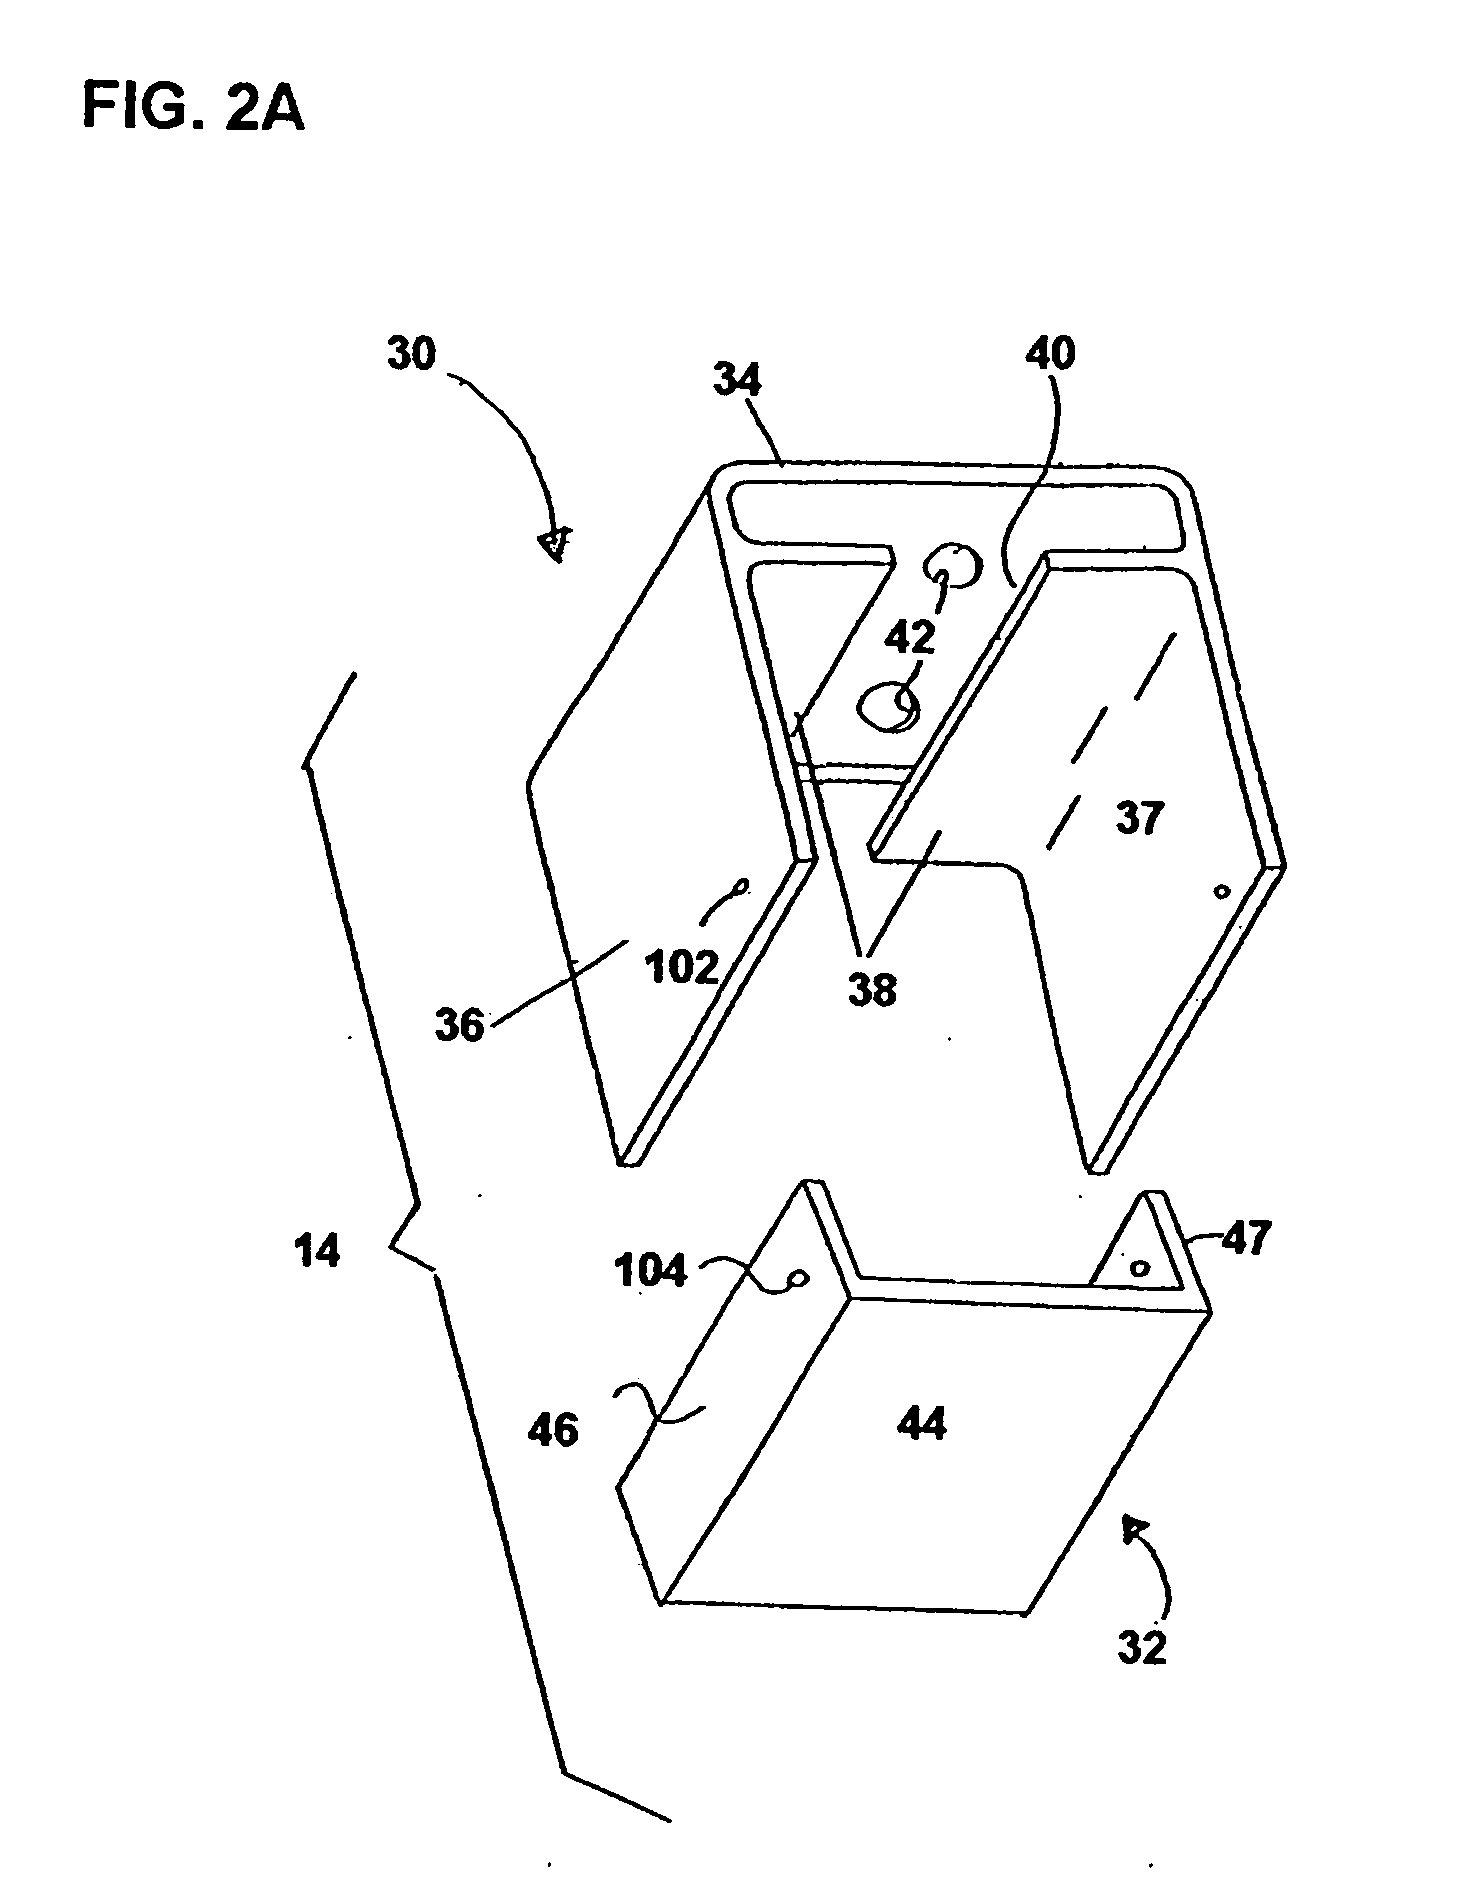 Sidewall panel and tarpaulin cover system for flat bed trailers, and truck trailer incorporating same